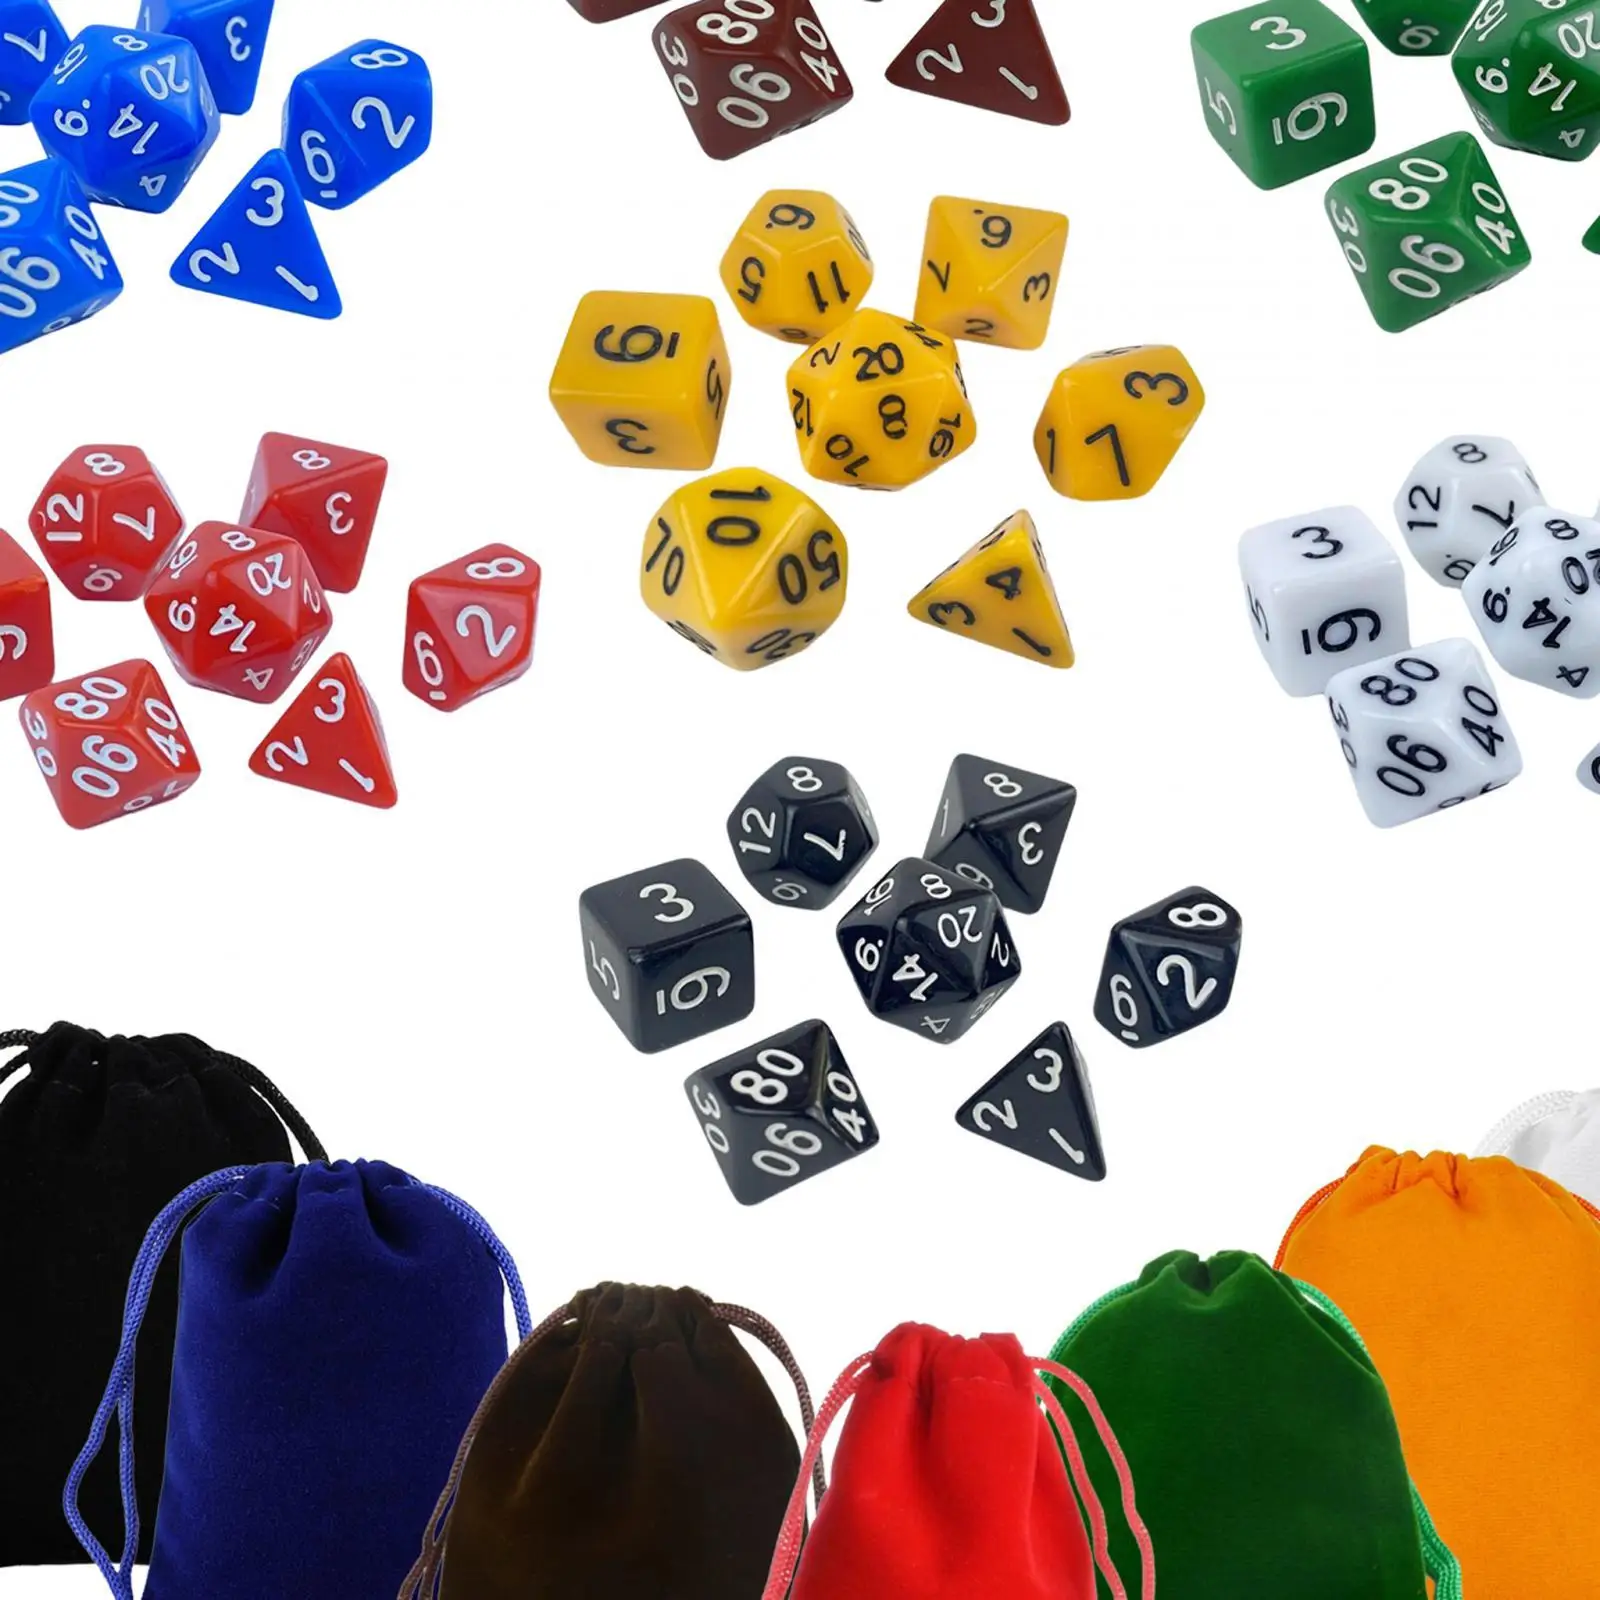 49 Pieces Game Dices Set Math Counting Teaching Aids Dice Set Card Games